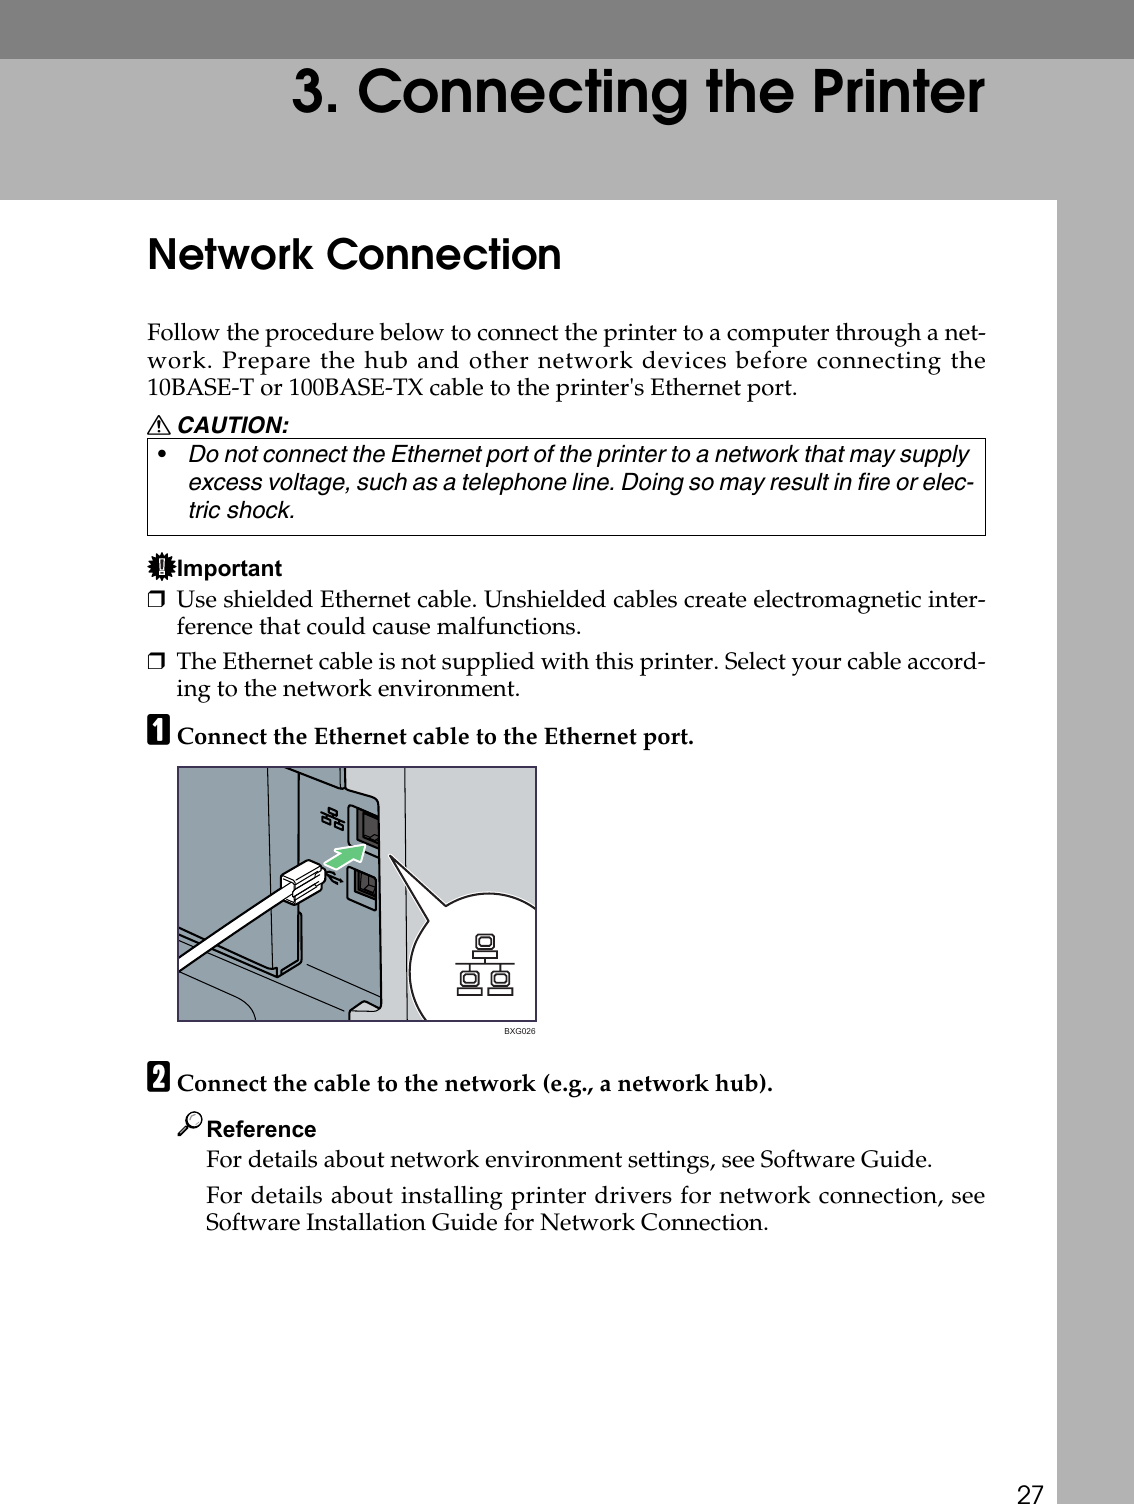 273. Connecting the PrinterNetwork ConnectionFollow the procedure below to connect the printer to a computer through a net-work. Prepare the hub and other network devices before connecting the10BASE-T or 100BASE-TX cable to the printer&apos;s Ethernet port.R CAUTION:Important❒Use shielded Ethernet cable. Unshielded cables create electromagnetic inter-ference that could cause malfunctions.❒The Ethernet cable is not supplied with this printer. Select your cable accord-ing to the network environment. AConnect the Ethernet cable to the Ethernet port.BConnect the cable to the network (e.g., a network hub).ReferenceFor details about network environment settings, see Software Guide.For details about installing printer drivers for network connection, seeSoftware Installation Guide for Network Connection.•Do not connect the Ethernet port of the printer to a network that may supply excess voltage, such as a telephone line. Doing so may result in fire or elec-tric shock.BXG026